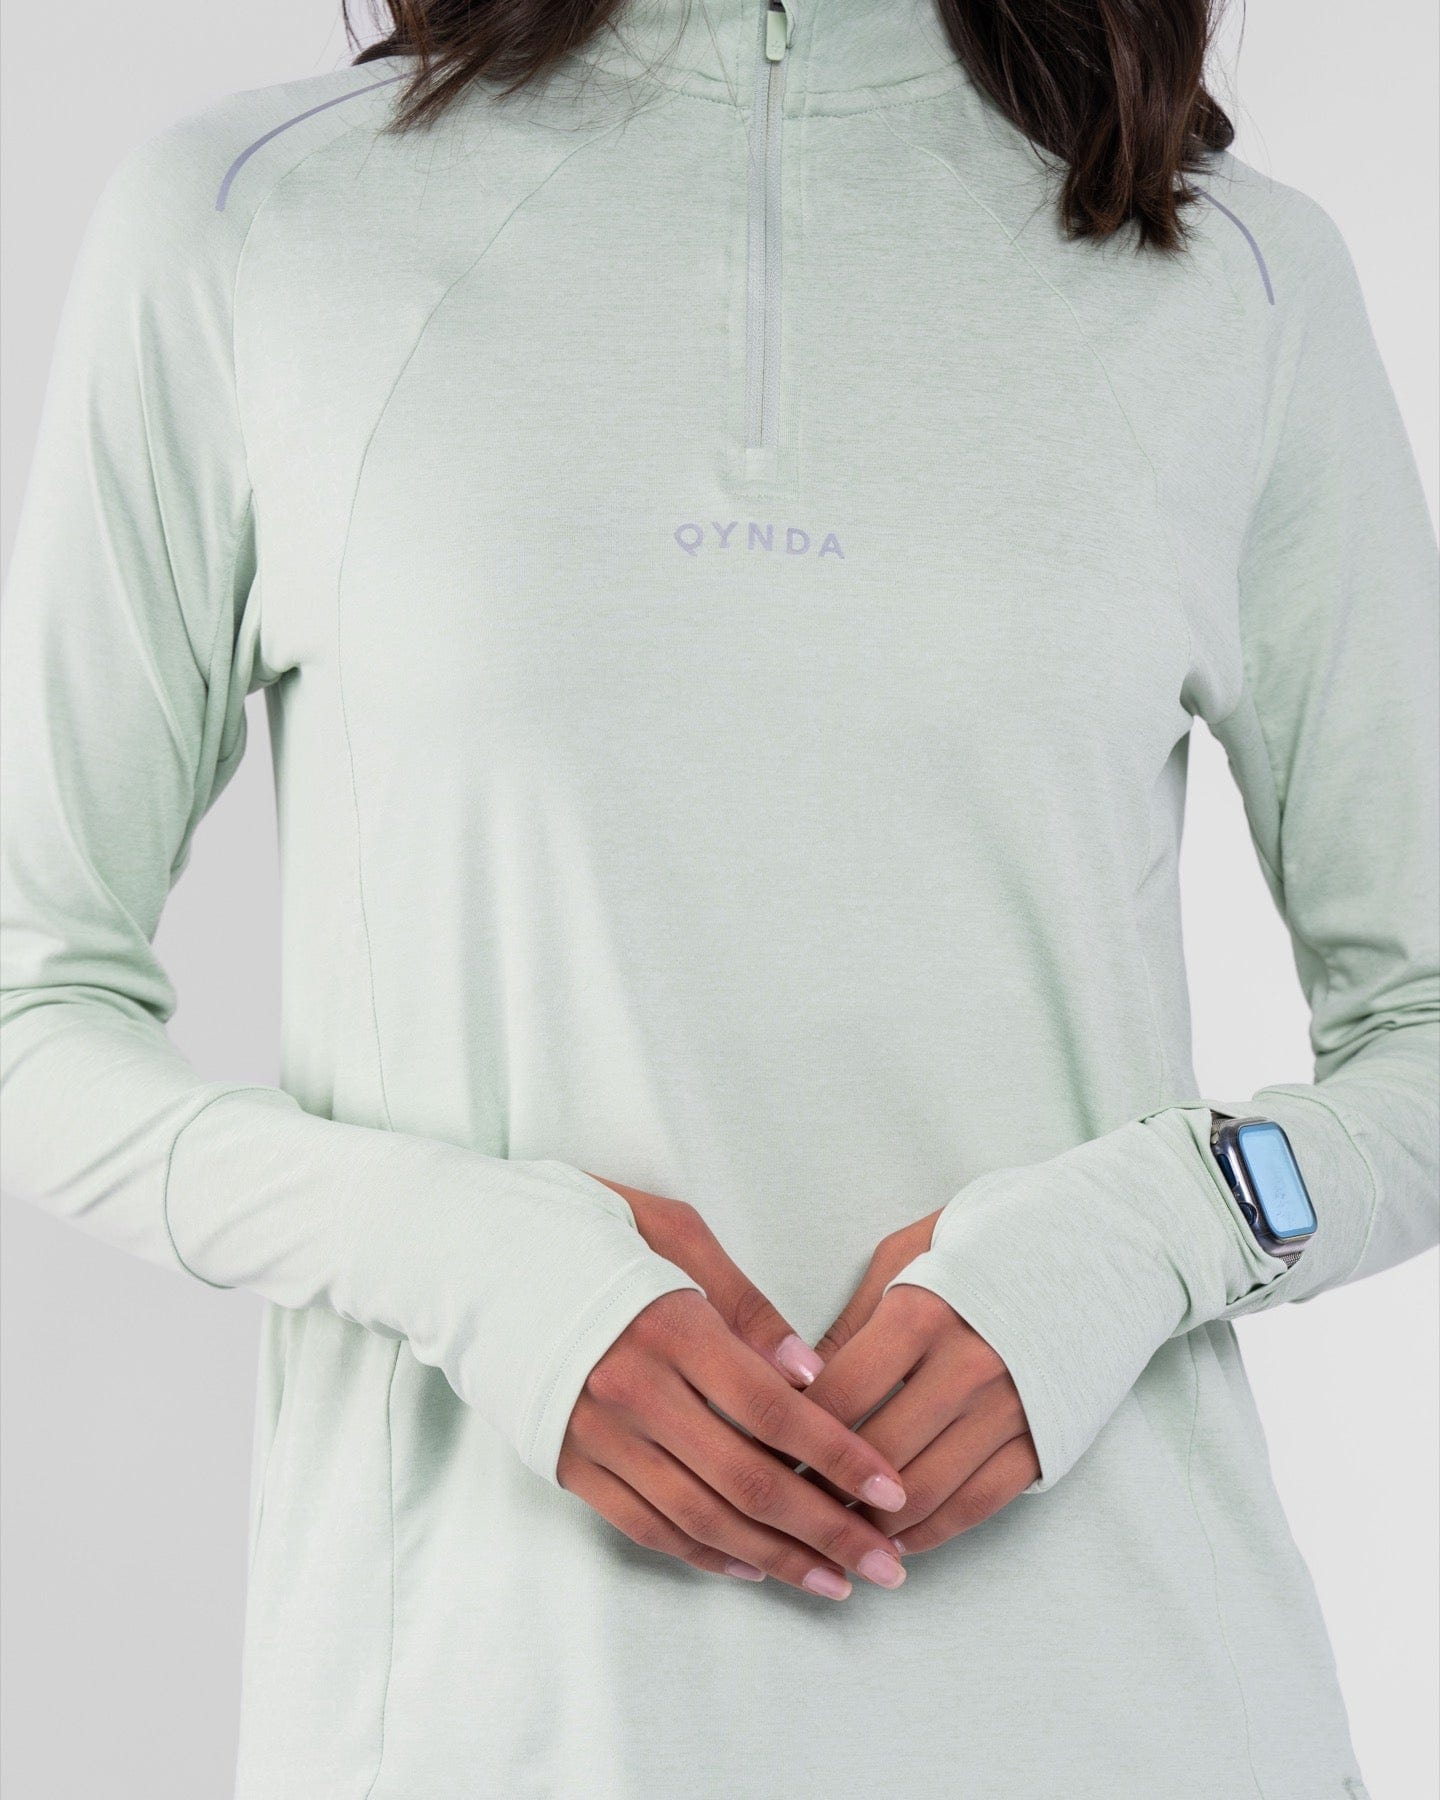 A close-up photo of a model in a Sage high neck long sleeve shirt ARMA by Qynda with cooling fabric technology, holding their hands together at the lower, showing a smartwatch on their left wrist.